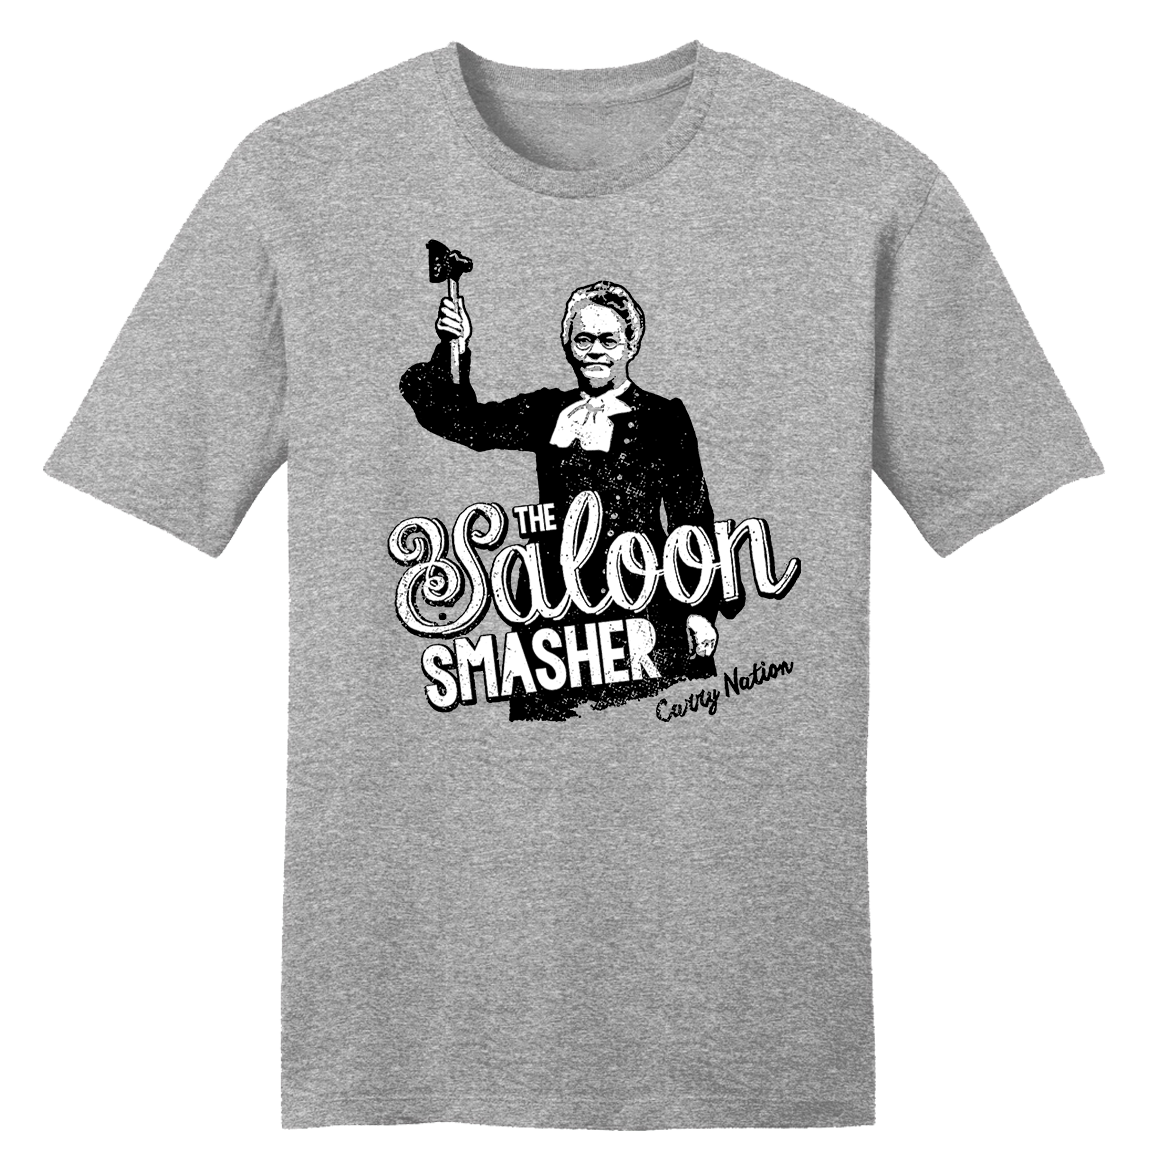 Carry Nation, The Saloon Smasher - Cincy Shirts